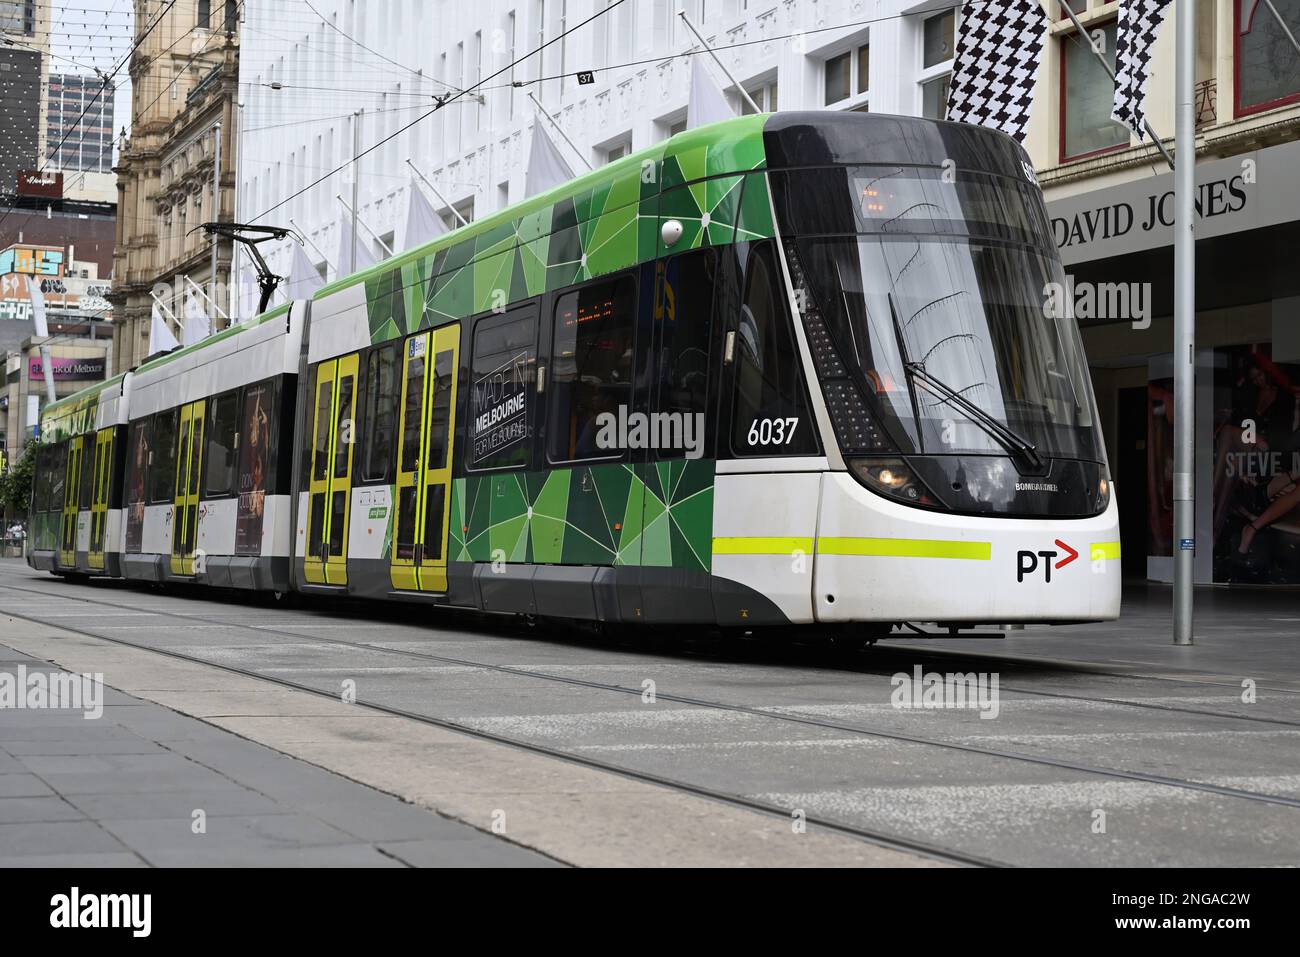 Low shot of a Bombardier Flexity (or E-class) tram, operated by Yarra Trams and featuring current PTV livery, travelling through Burke St Mall Stock Photo